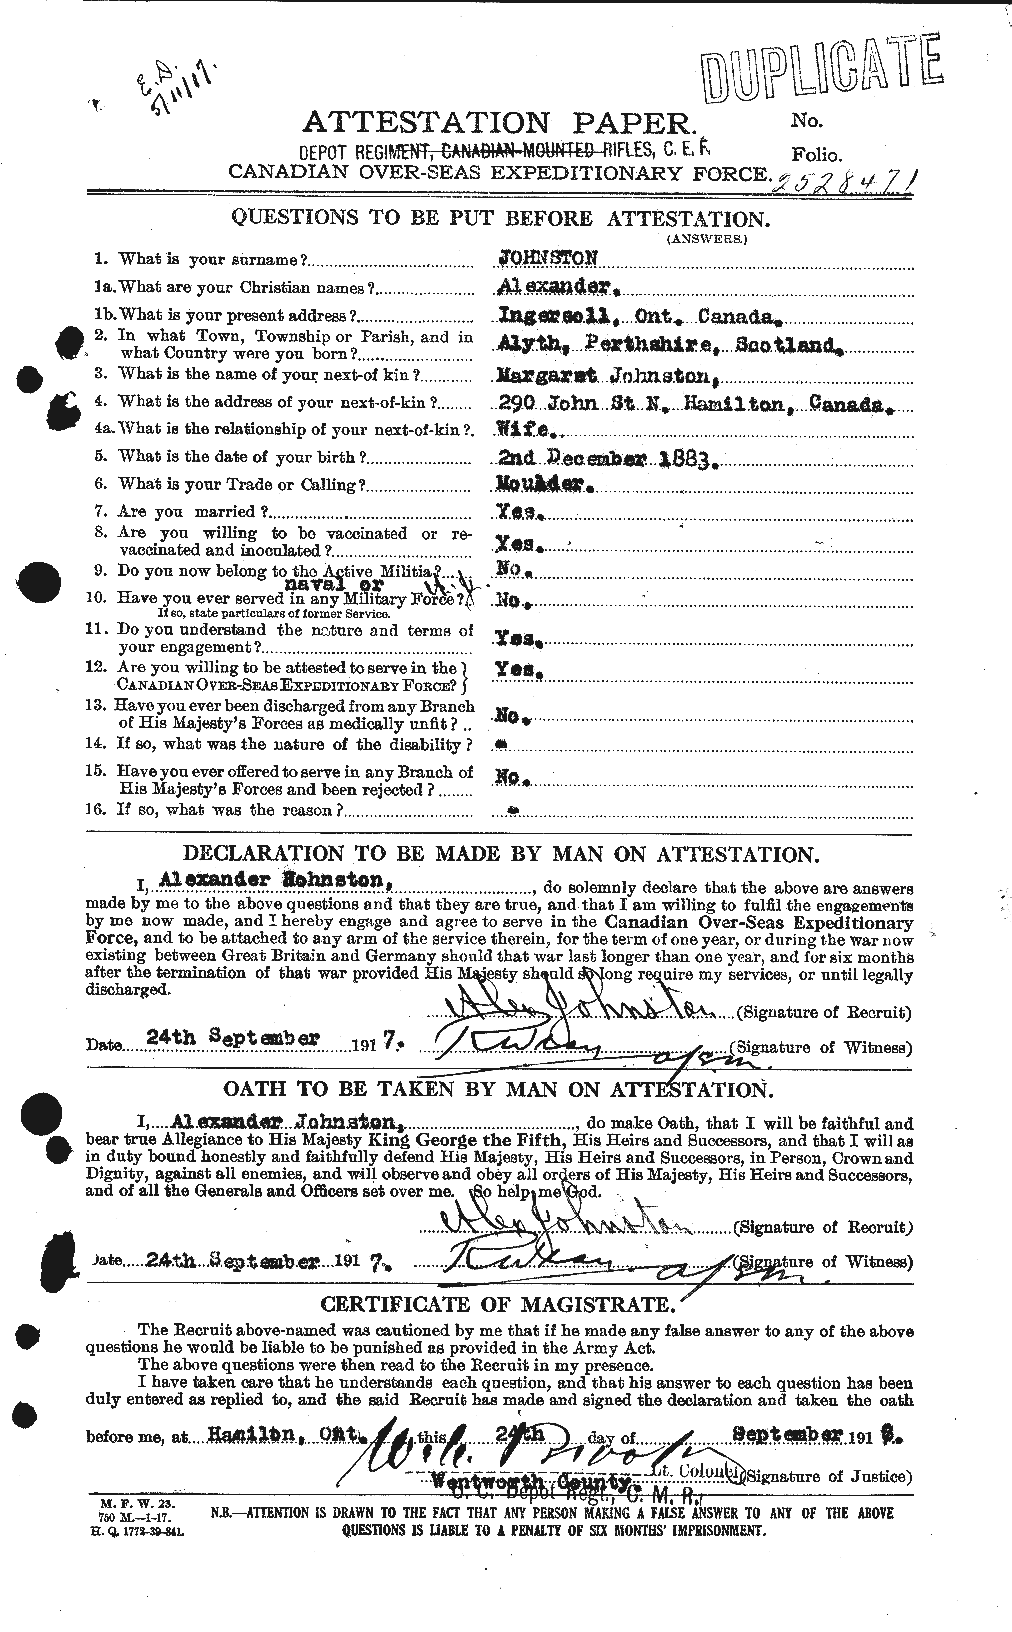 Personnel Records of the First World War - CEF 420962a